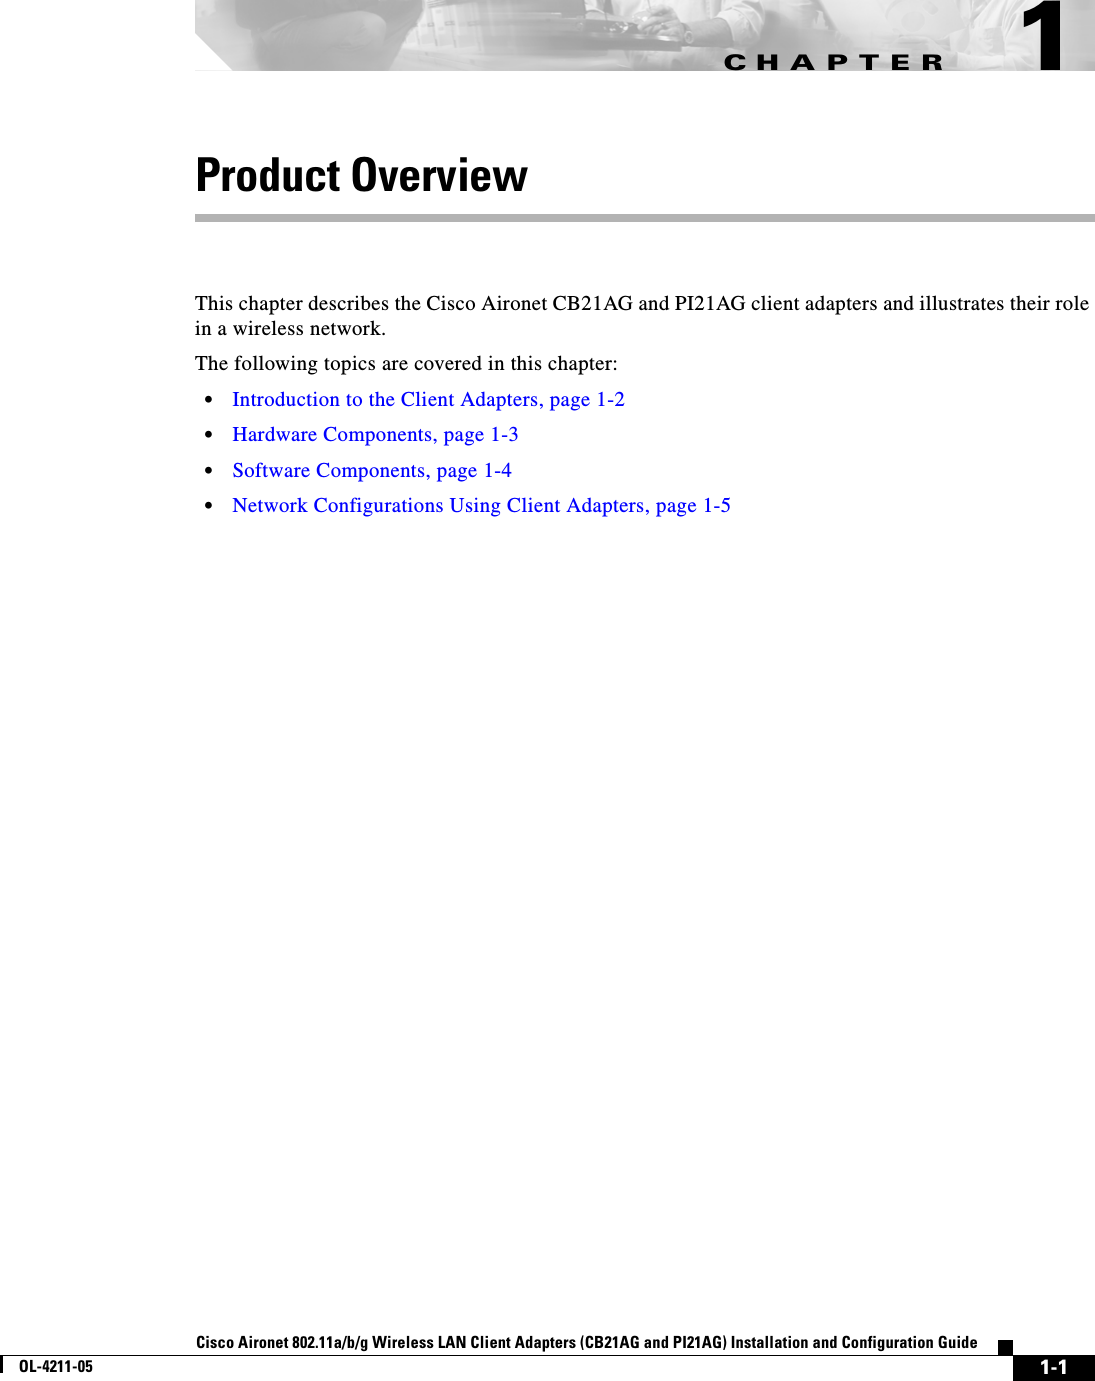 CHAPTER1-1Cisco Aironet 802.11a/b/g Wireless LAN Client Adapters (CB21AG and PI21AG) Installation and Configuration GuideOL-4211-051Product OverviewThis chapter describes the Cisco Aironet CB21AG and PI21AG client adapters and illustrates their role in a wireless network.The following topics are covered in this chapter:•Introduction to the Client Adapters, page 1-2•Hardware Components, page 1-3•Software Components, page 1-4•Network Configurations Using Client Adapters, page 1-5